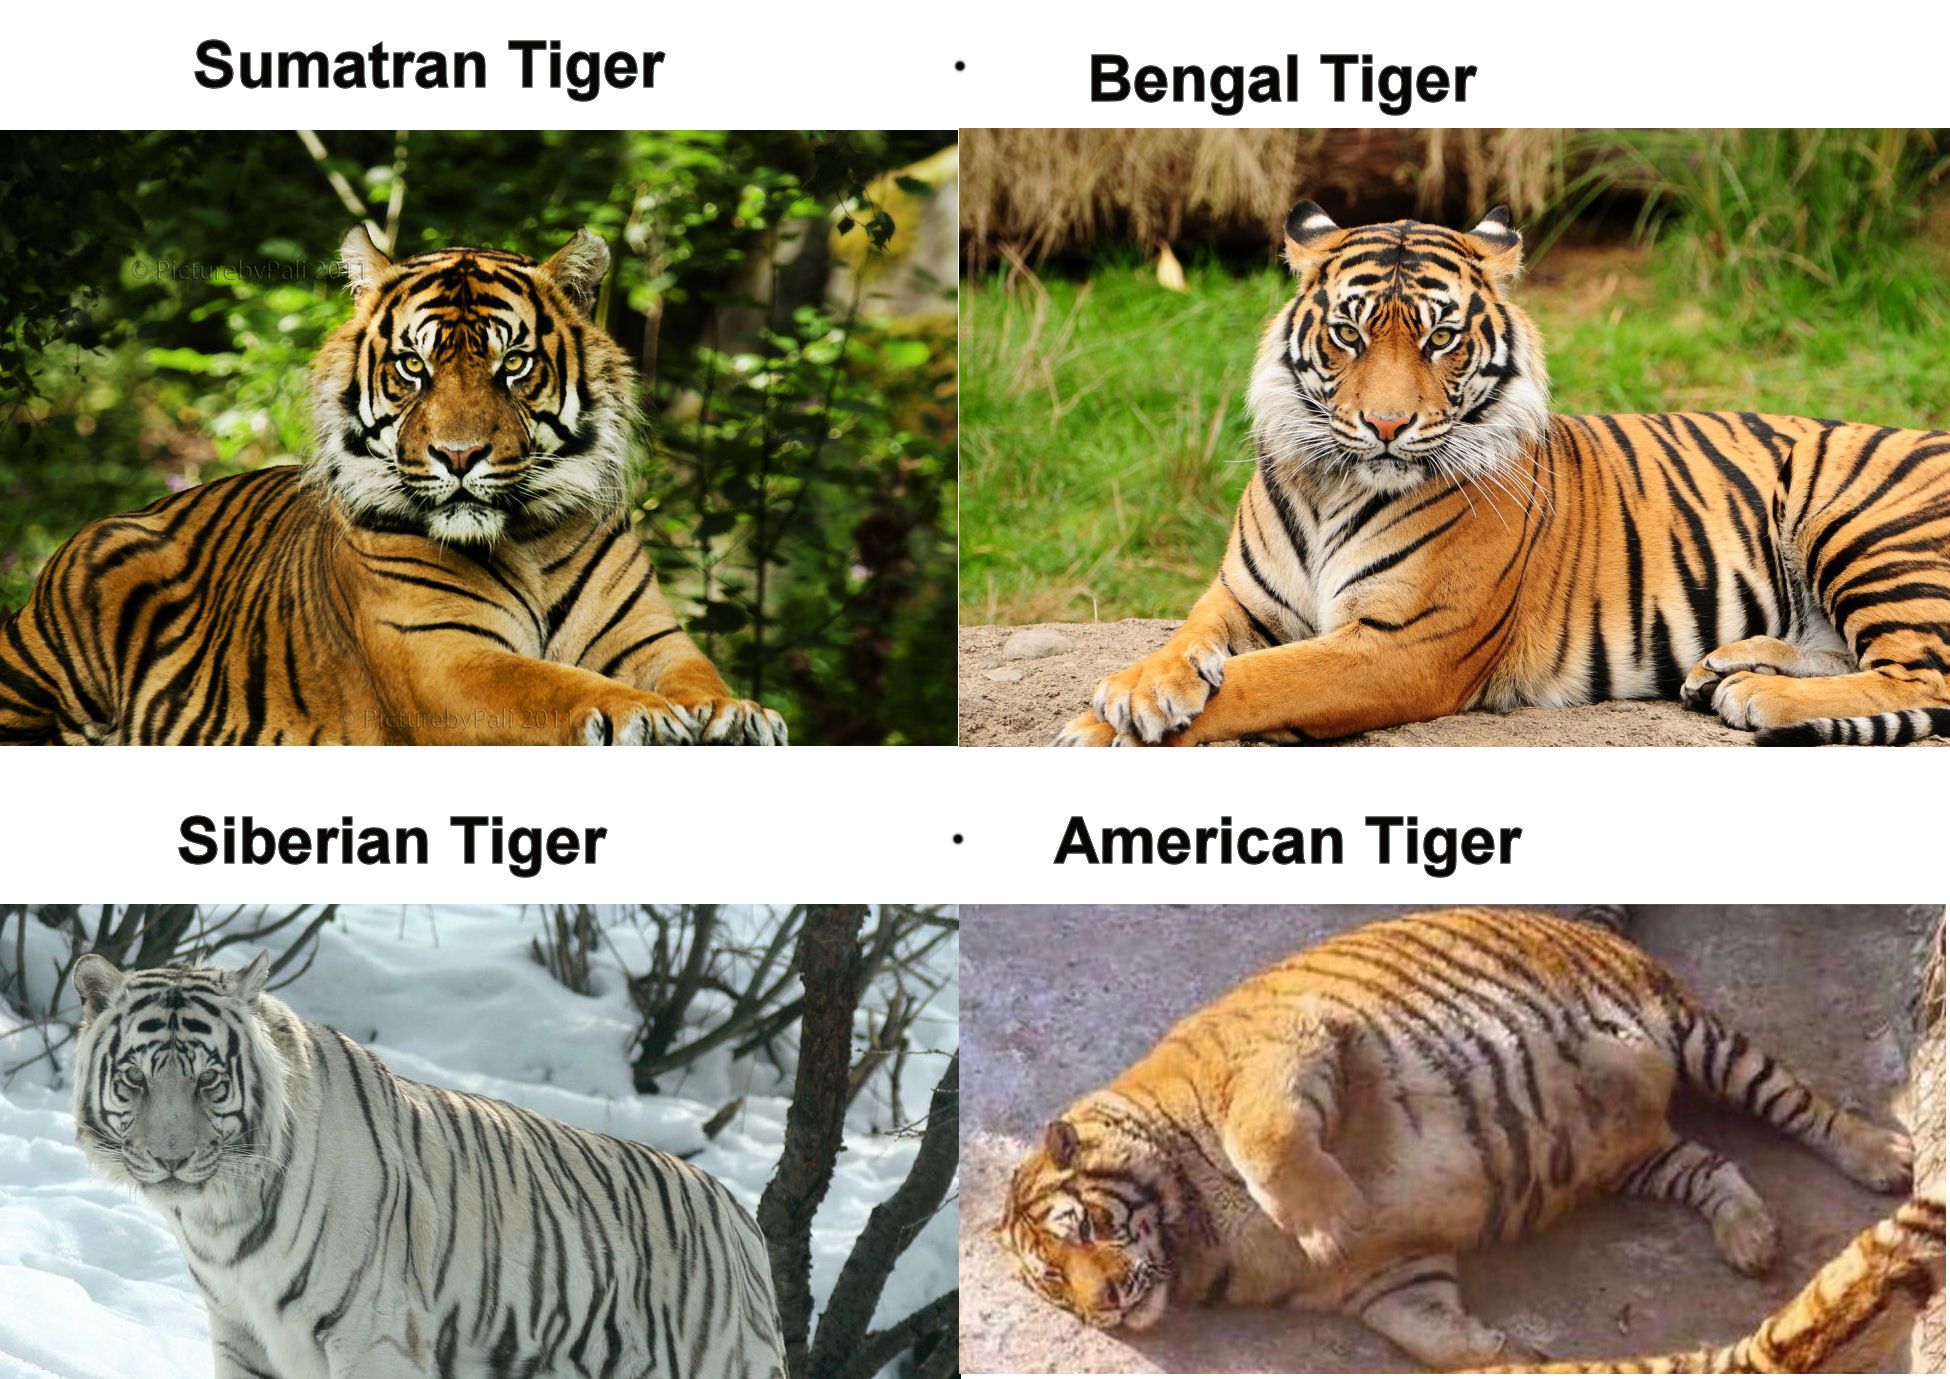 Know your Big Cats!